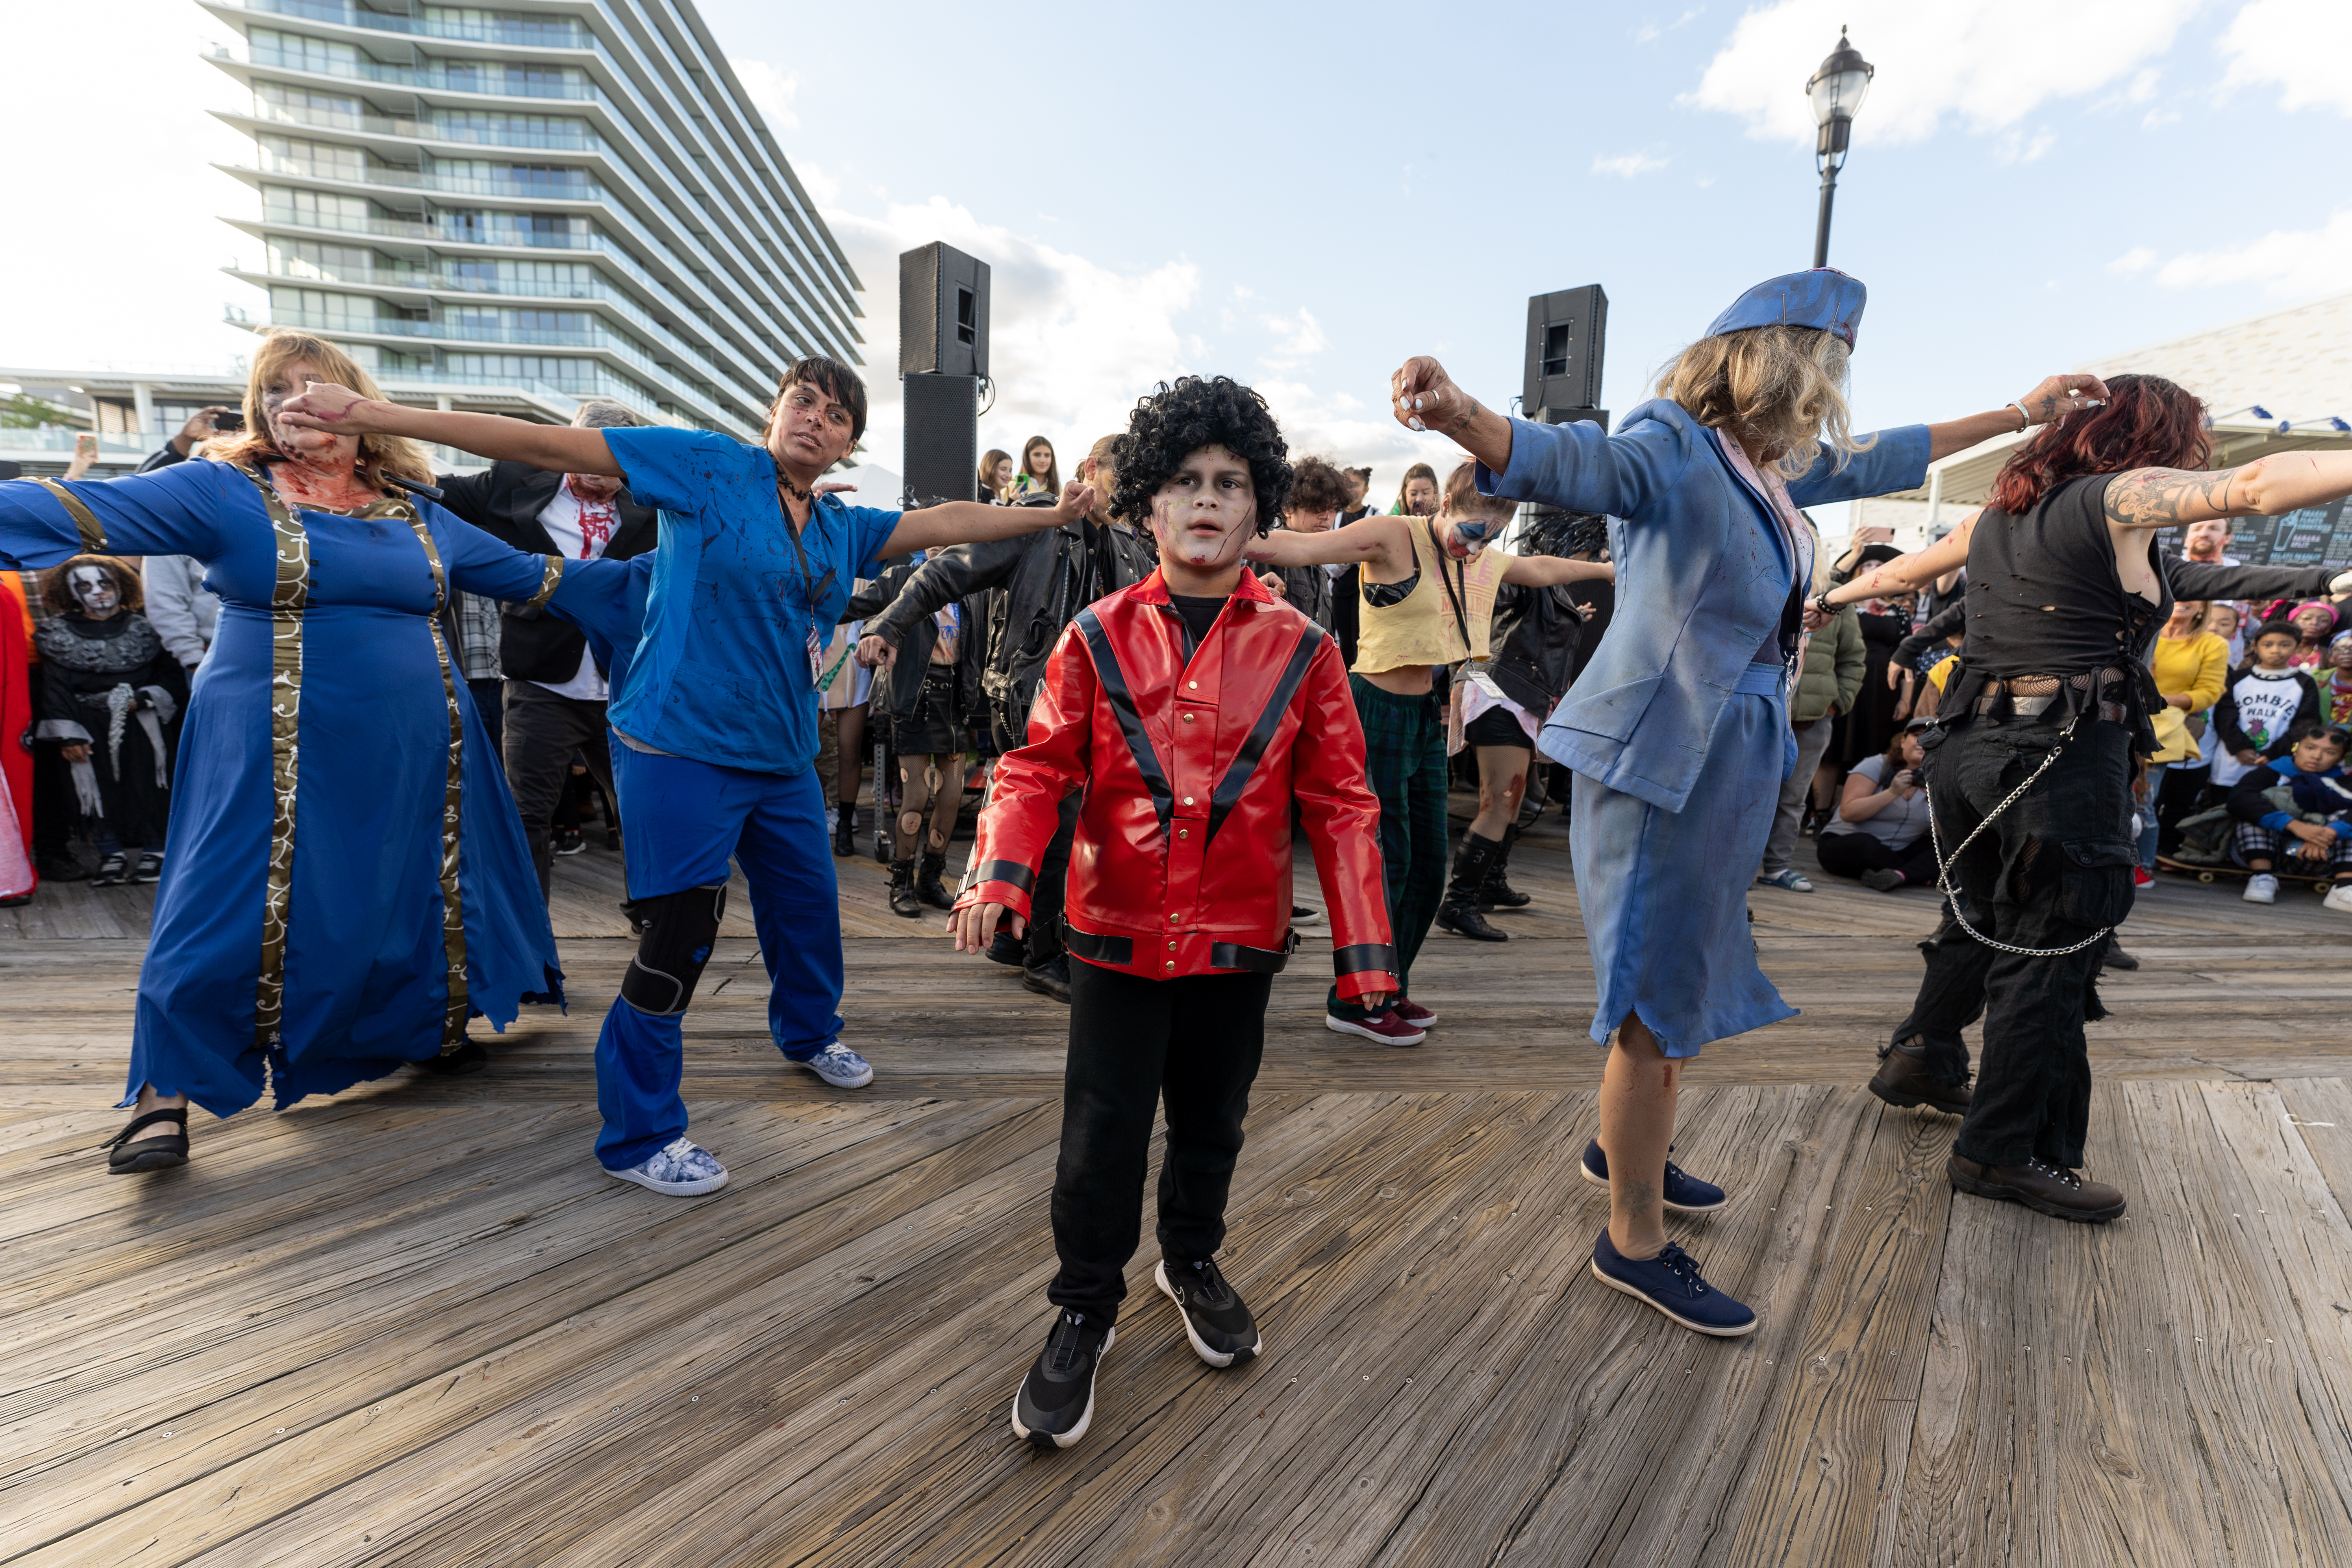 Joseph Vodarsik-Judikic, dressed as zombie Michael Jackson, participates in the zombie Thriller dance during the 14th Asbury Park Zombie Walk in Asbury Park on Saturday, October 8, 2022. The zombie walk held its first themed year with the theme being 80's and 90's punk and metal.